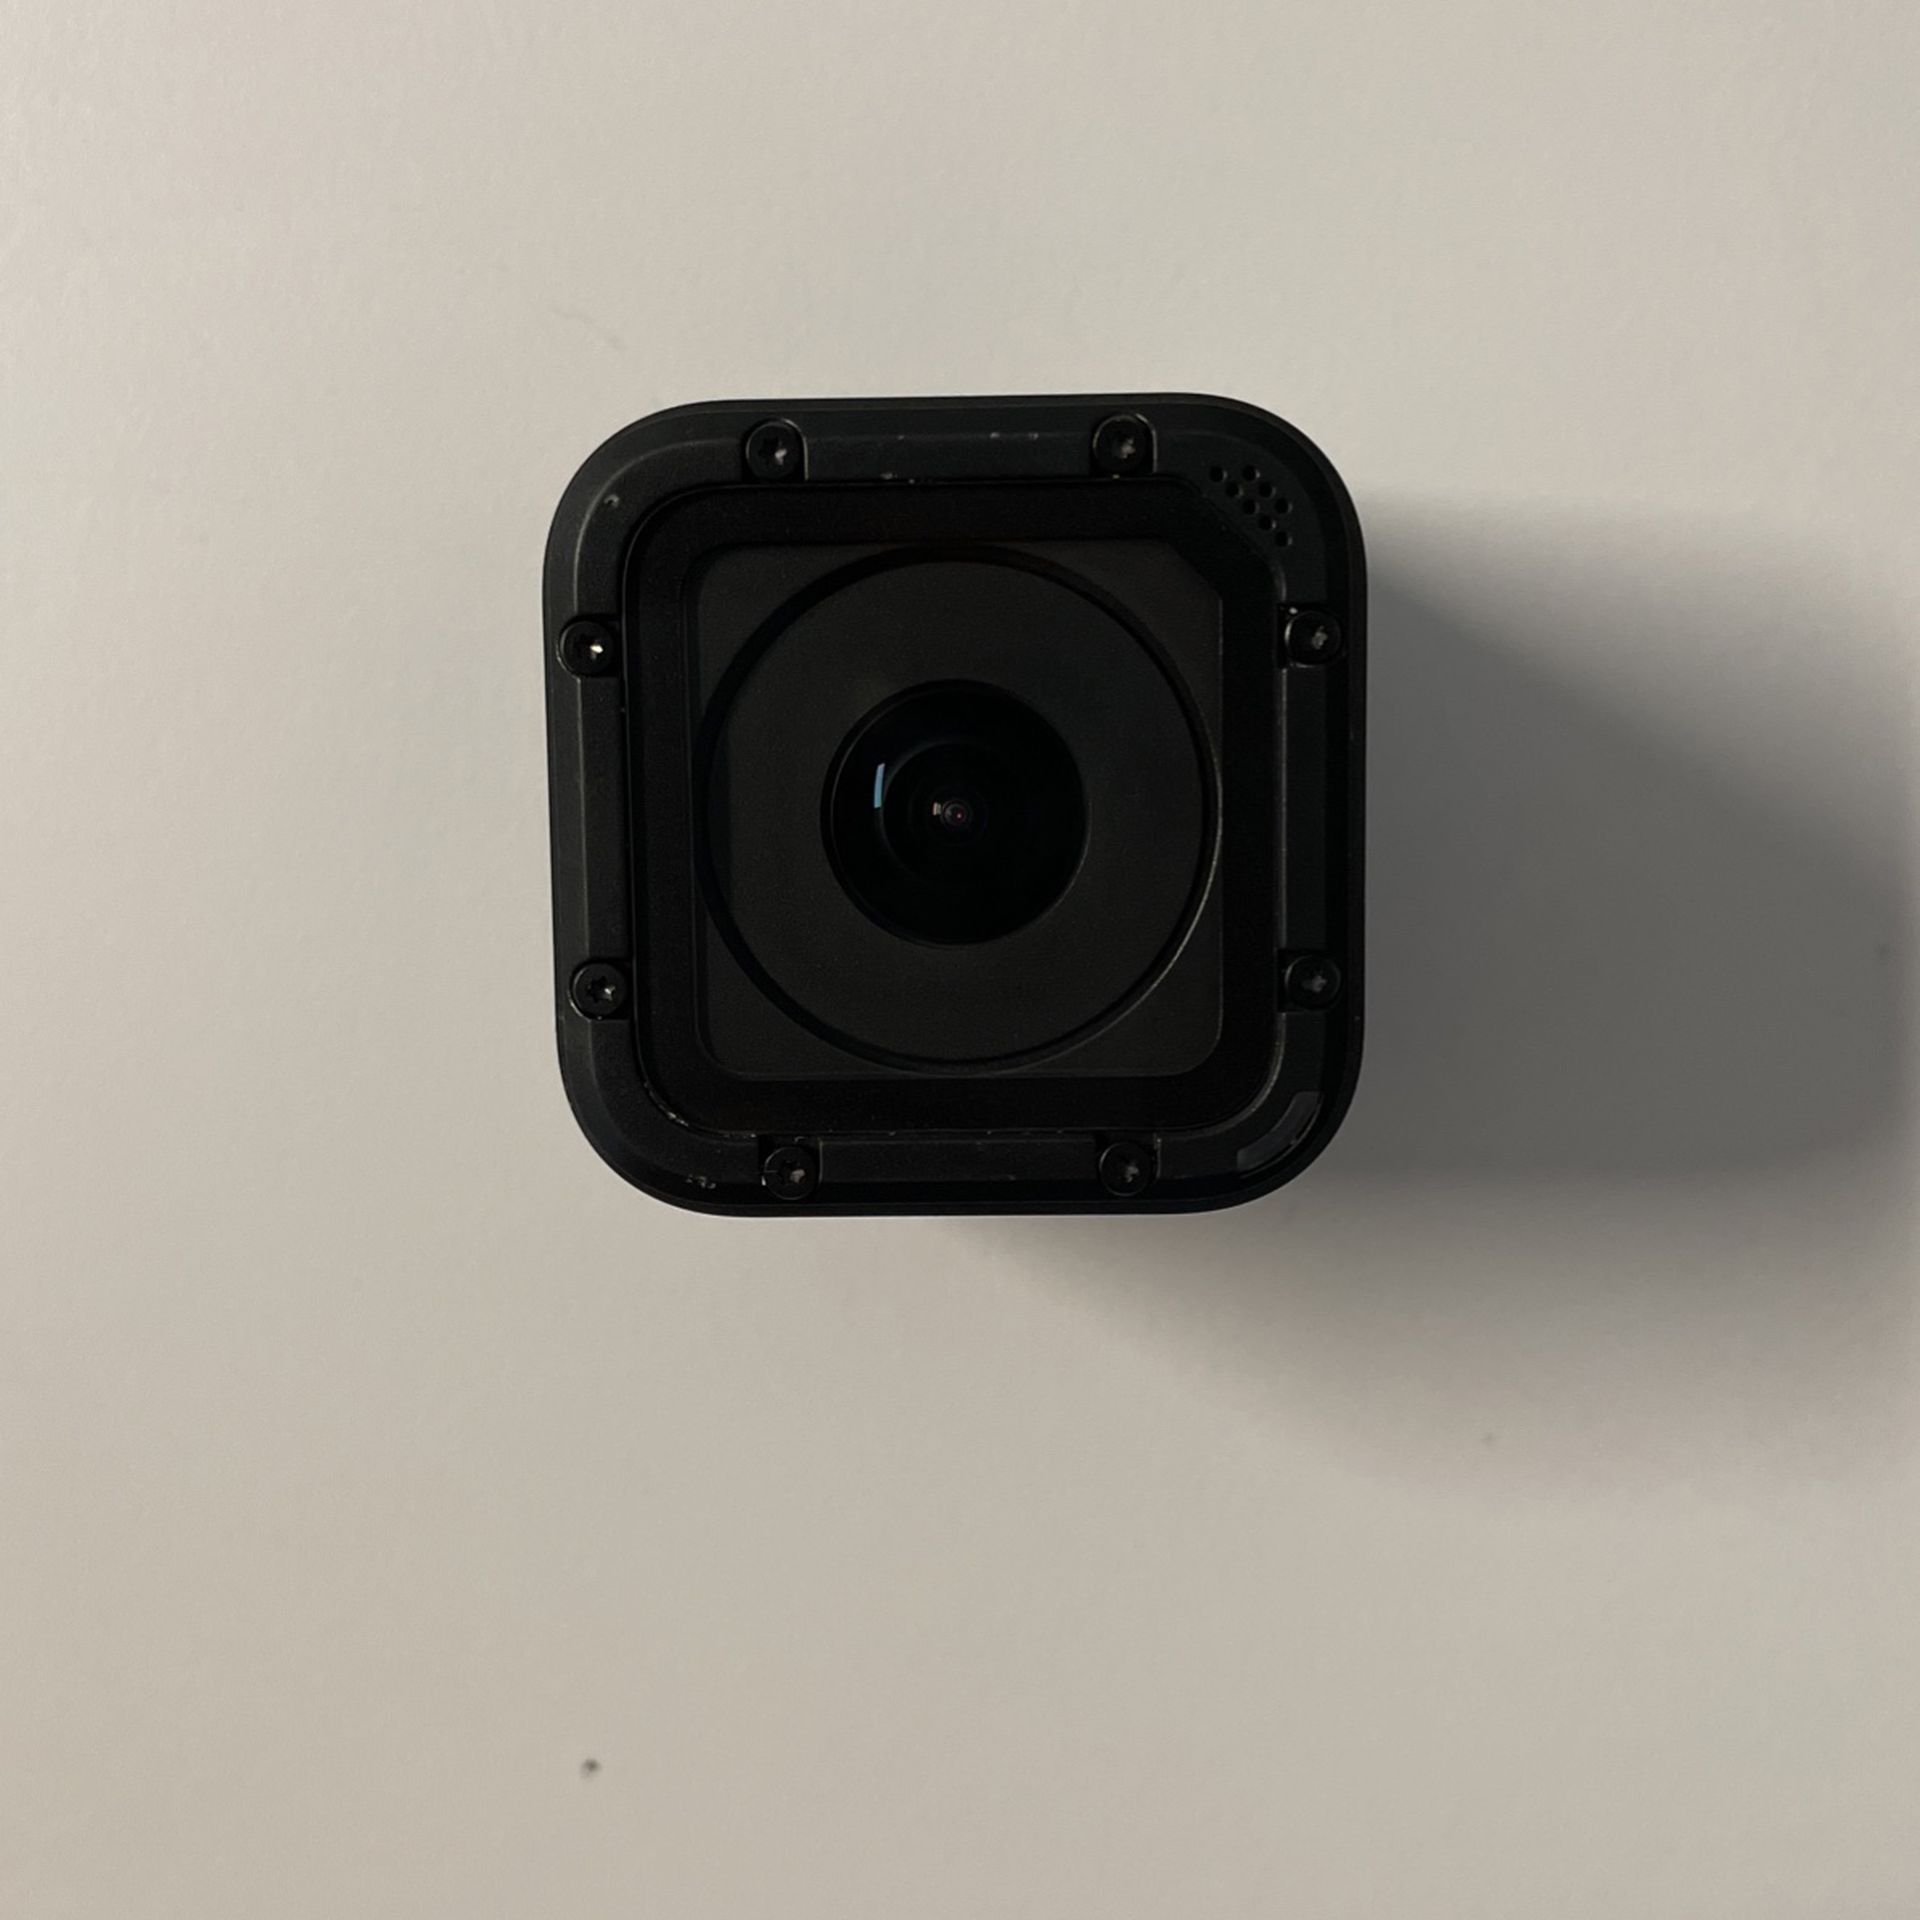 GoPro Hero Session and Accessories